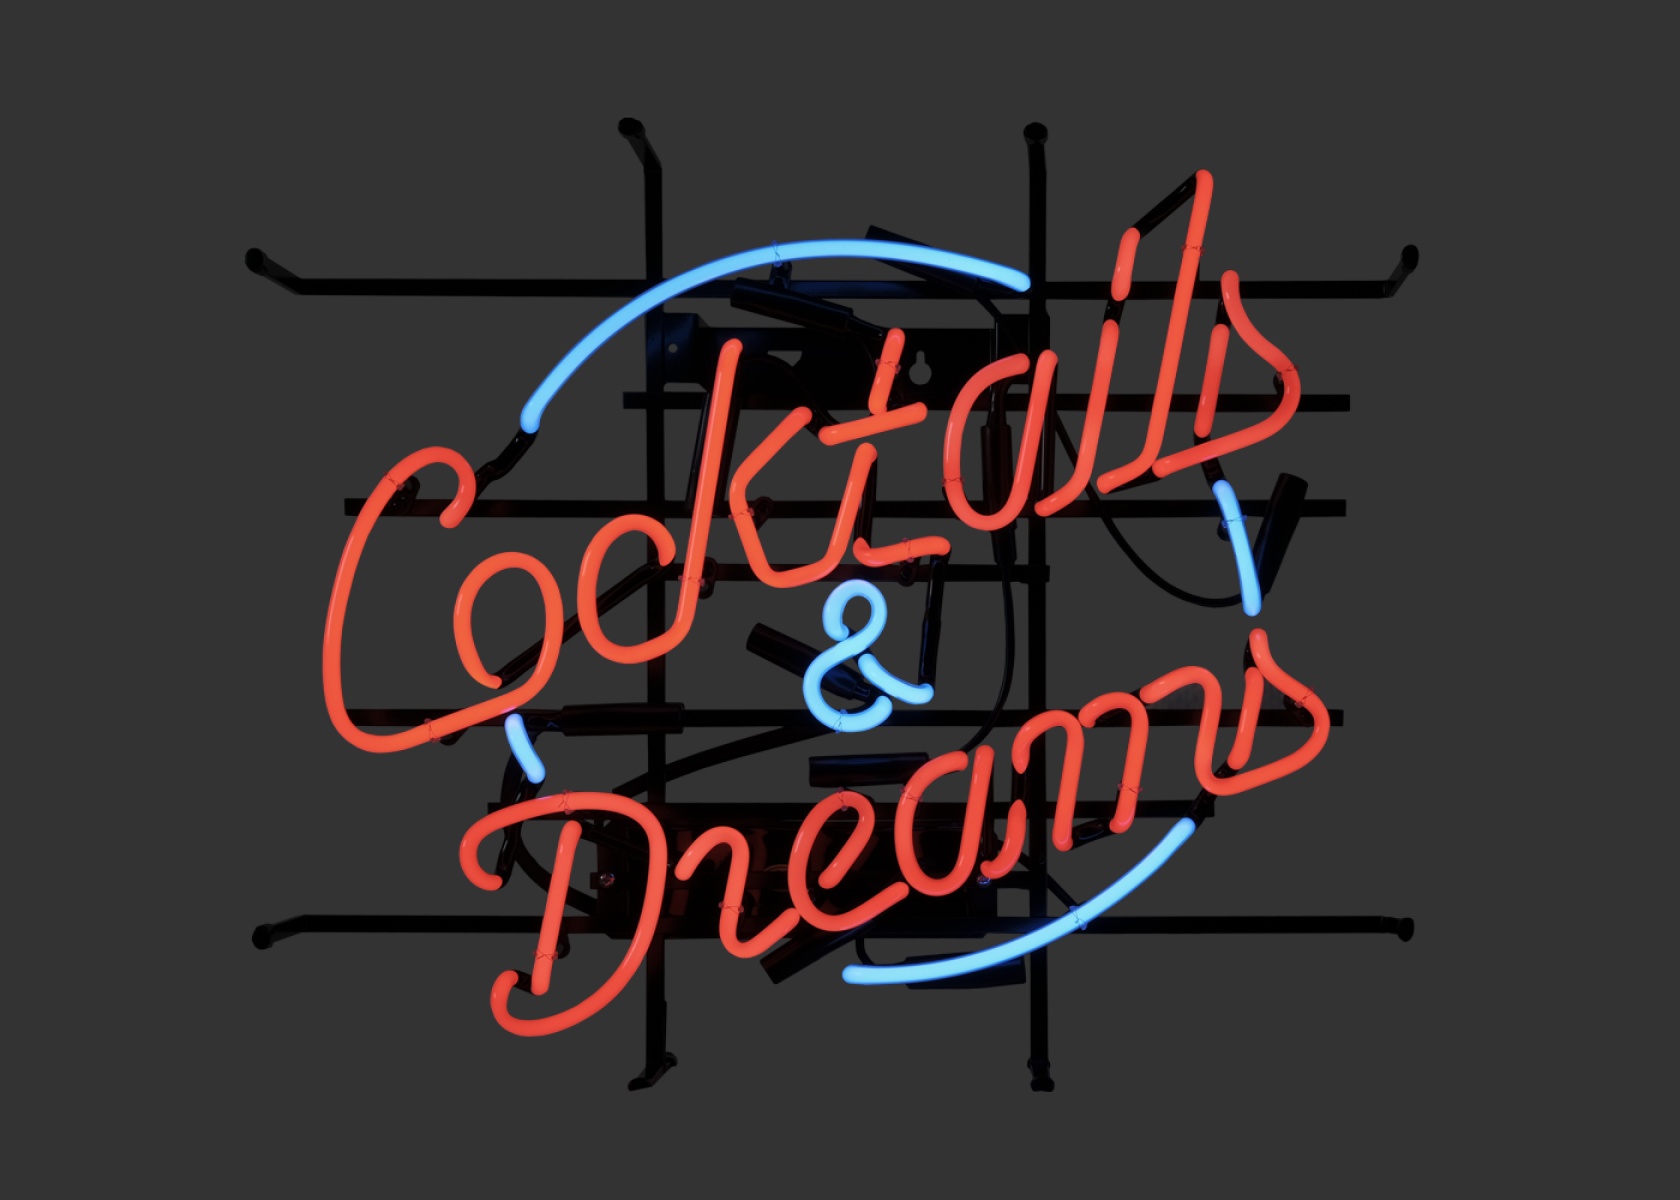 Cocktails and dreams neon sign - Bar - Drinks